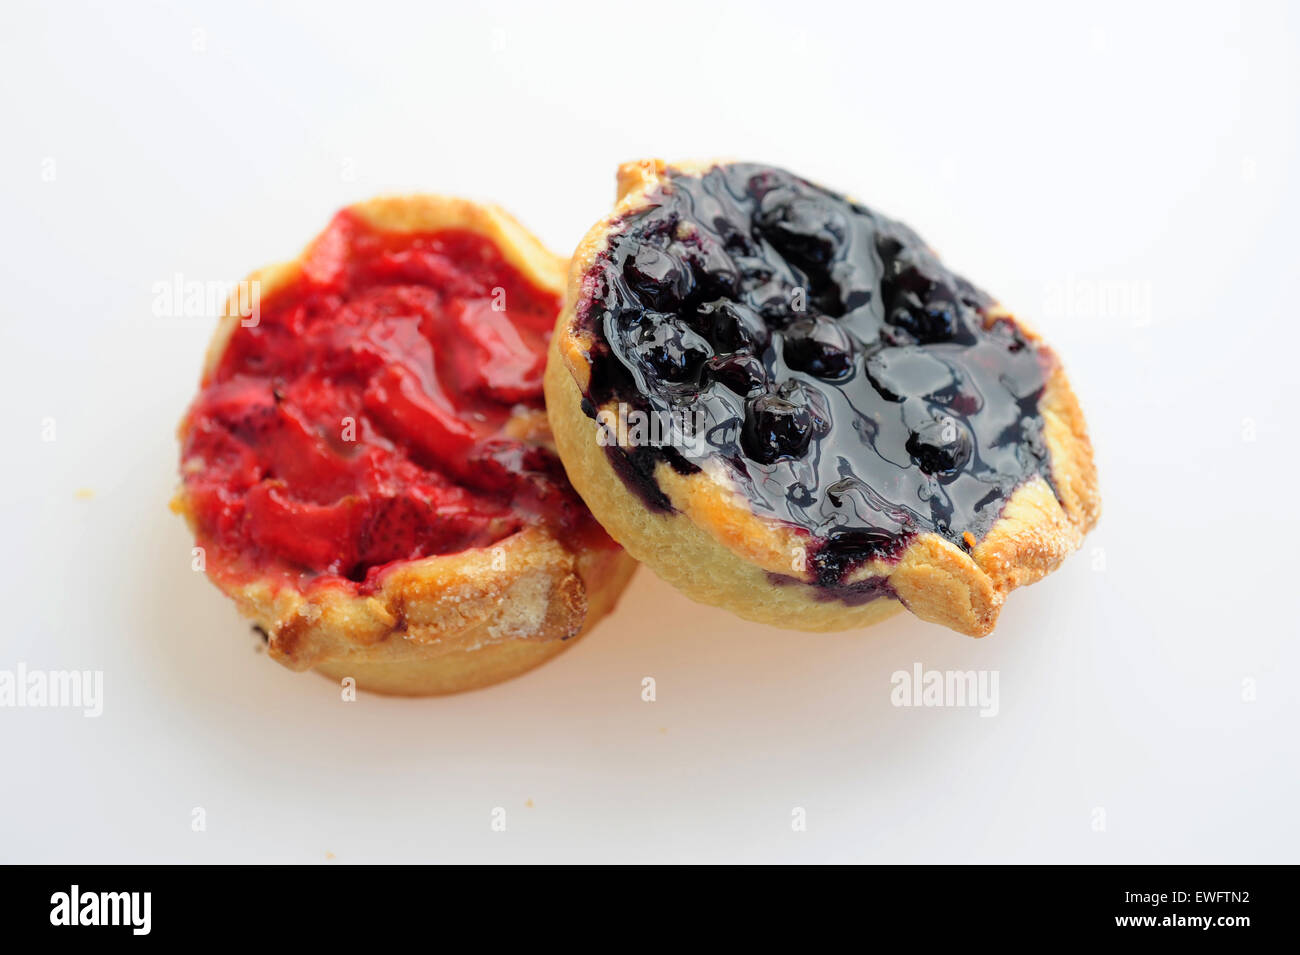 Food sweets desserts baked goods a rhubarb and strawberry tart and a blueberry tart Stock Photo